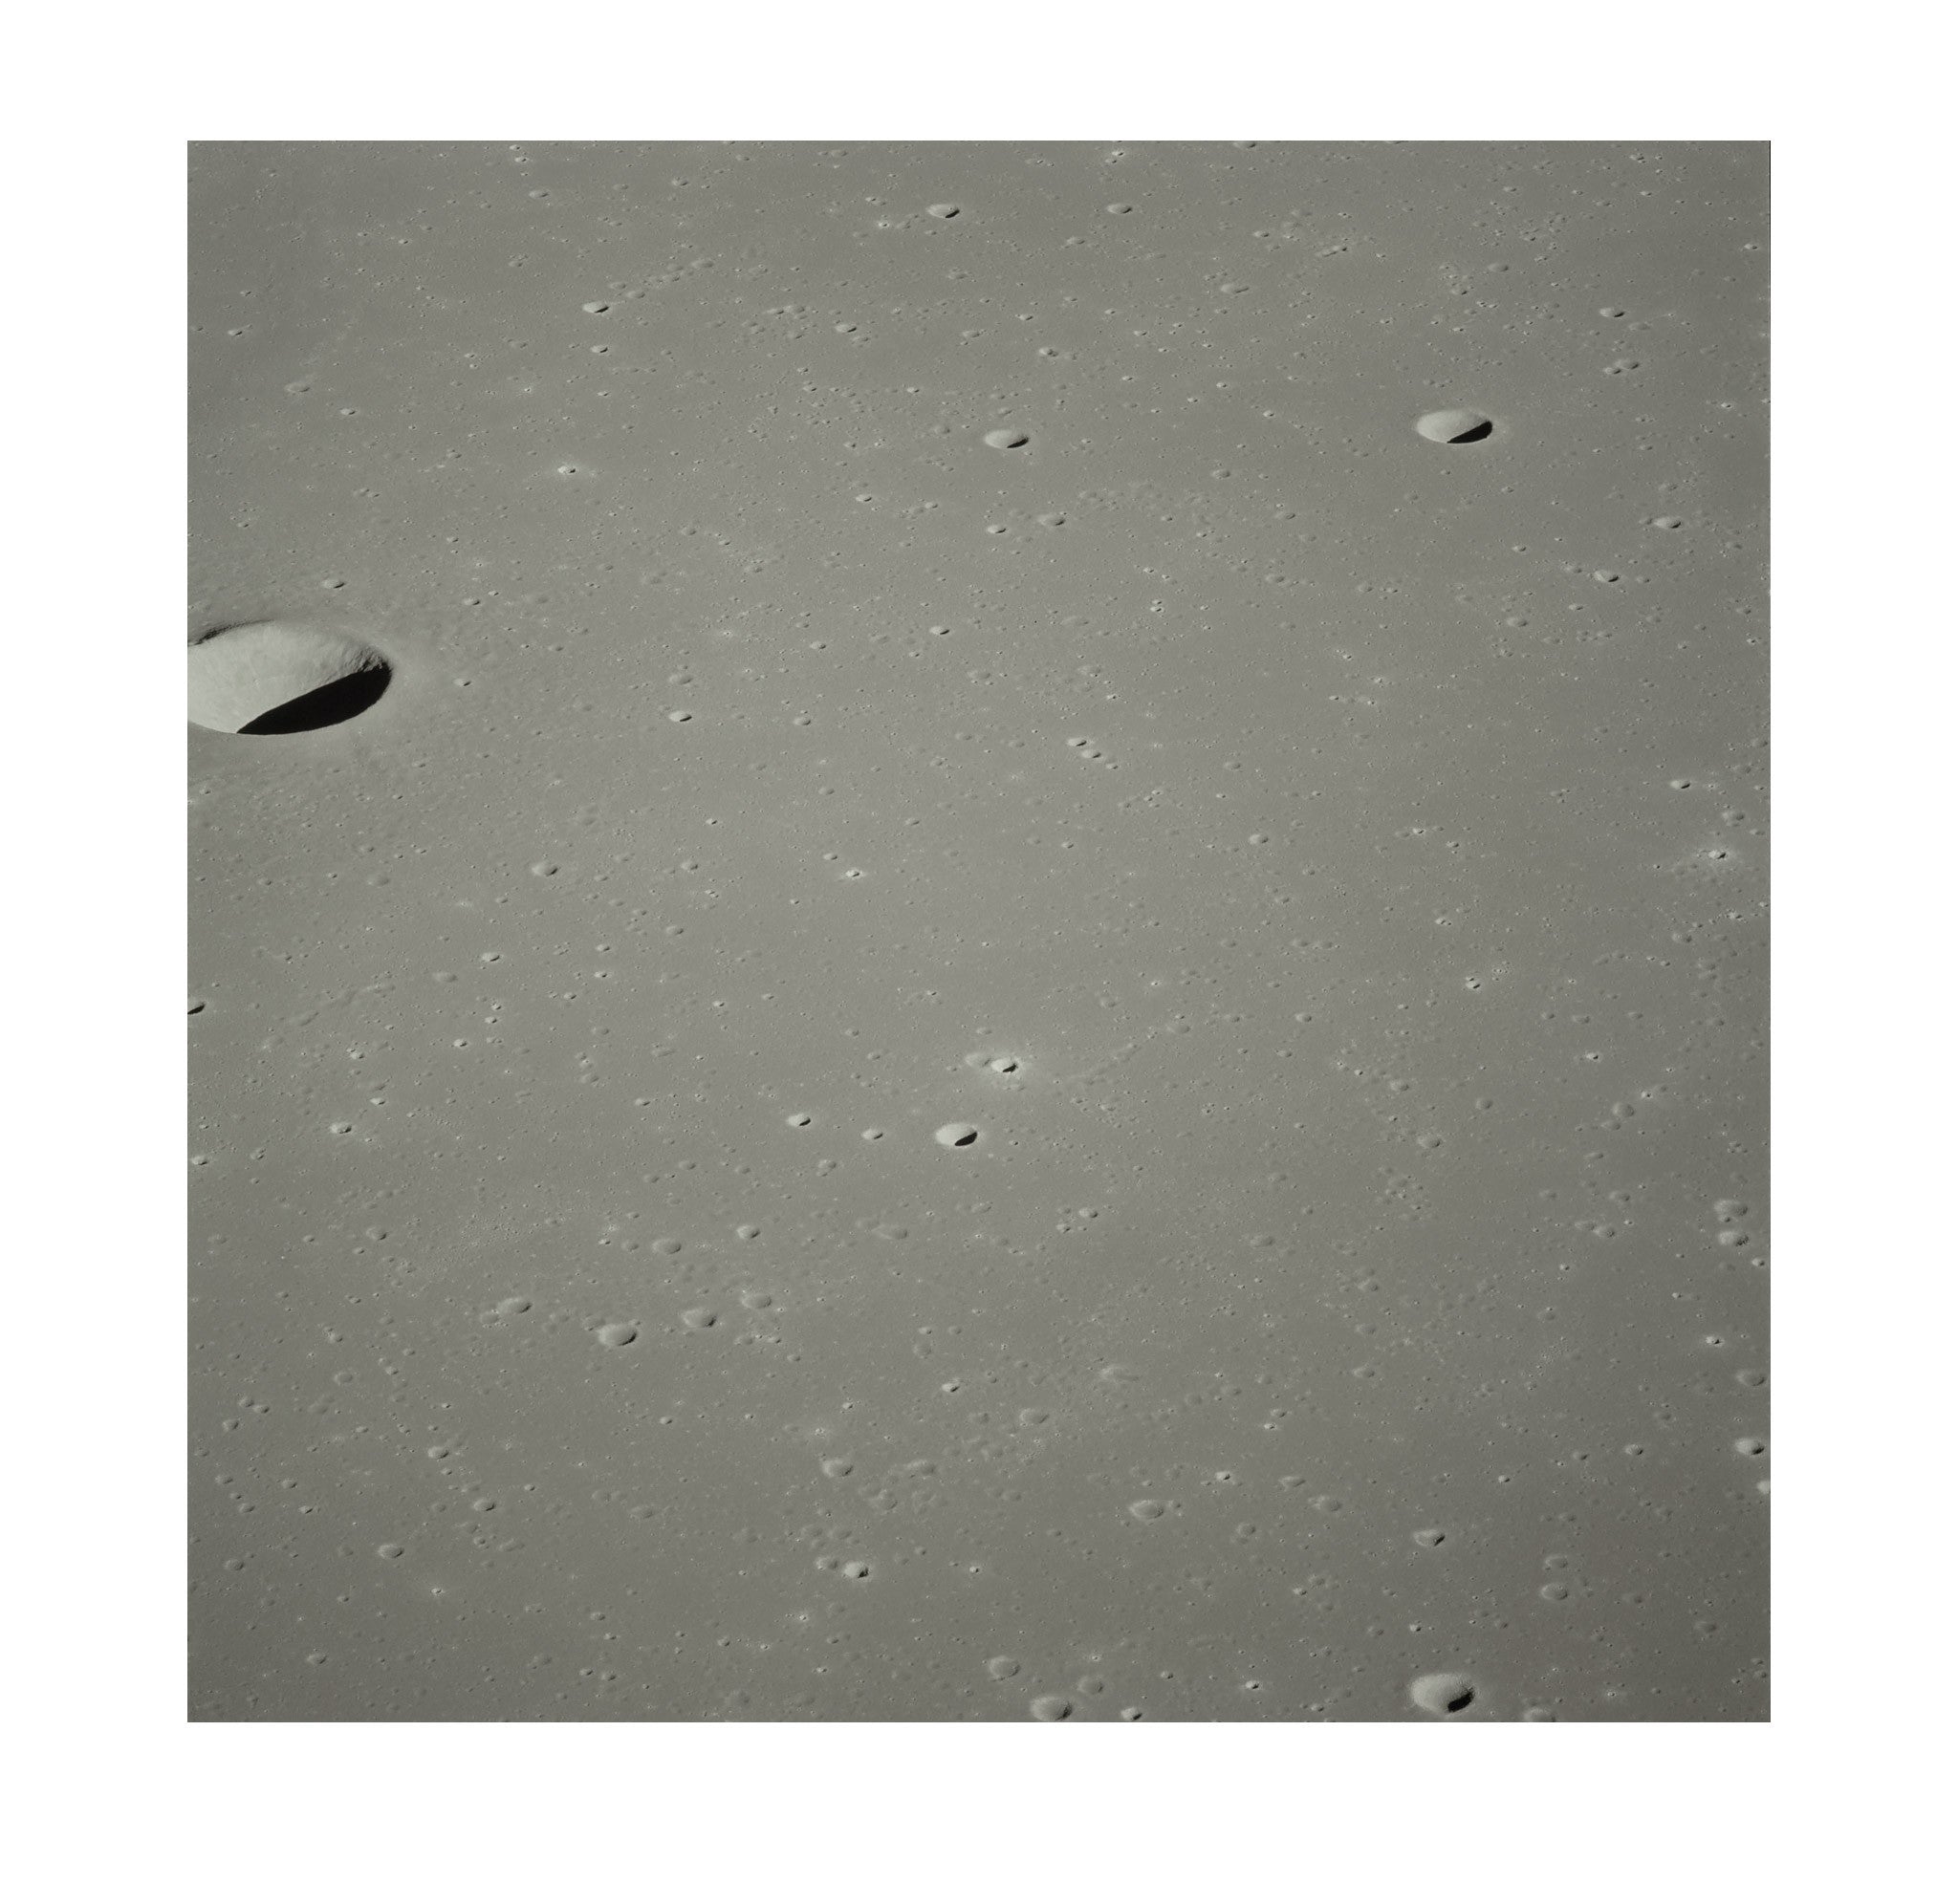 Apollo 17 – Cratered Moon